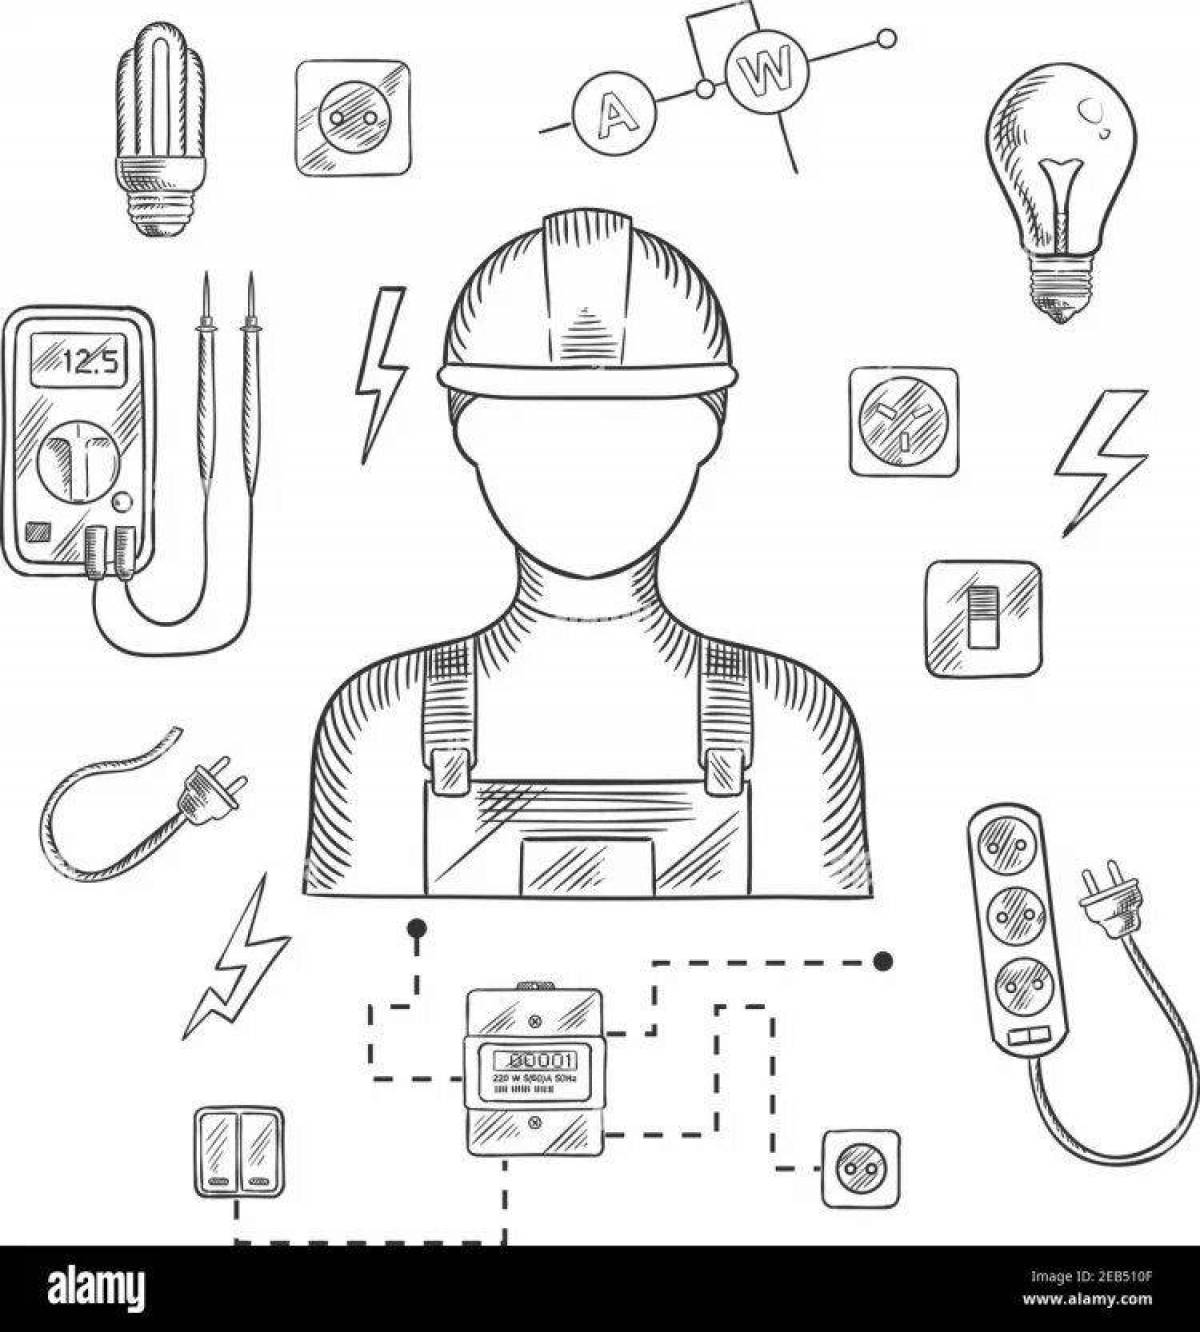 Electrician coloring book